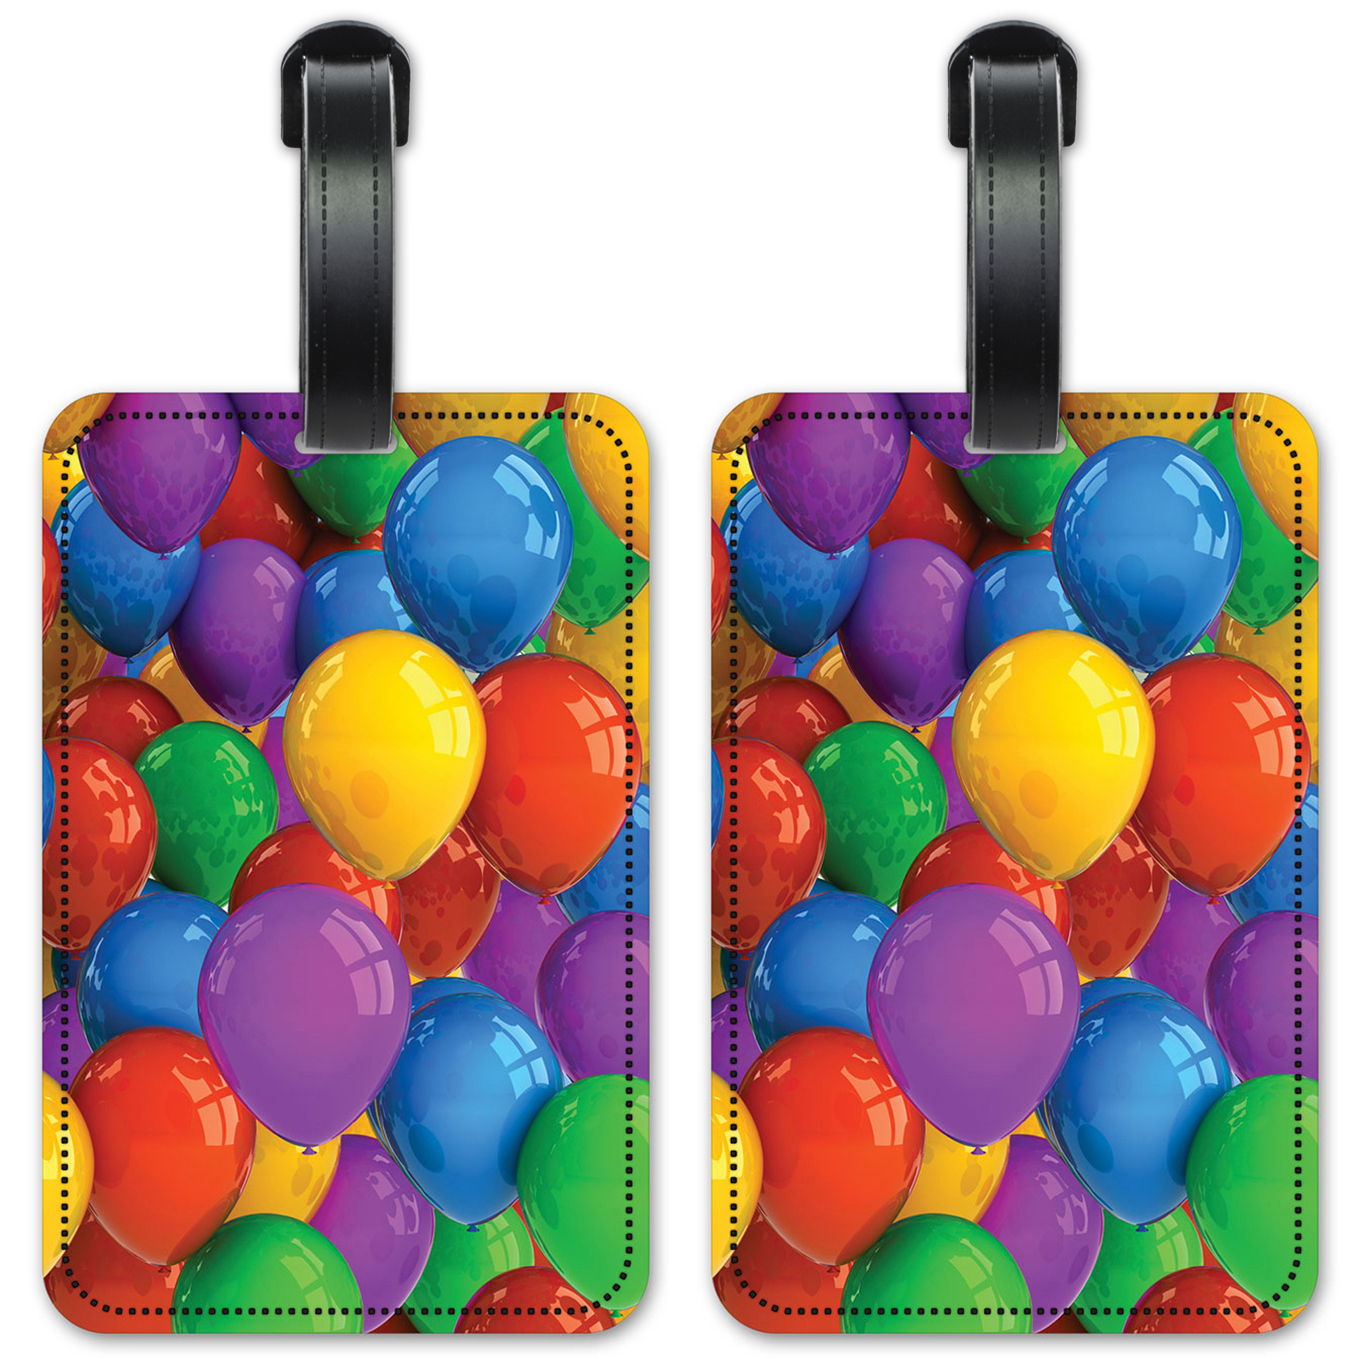 Party Balloons - #8183